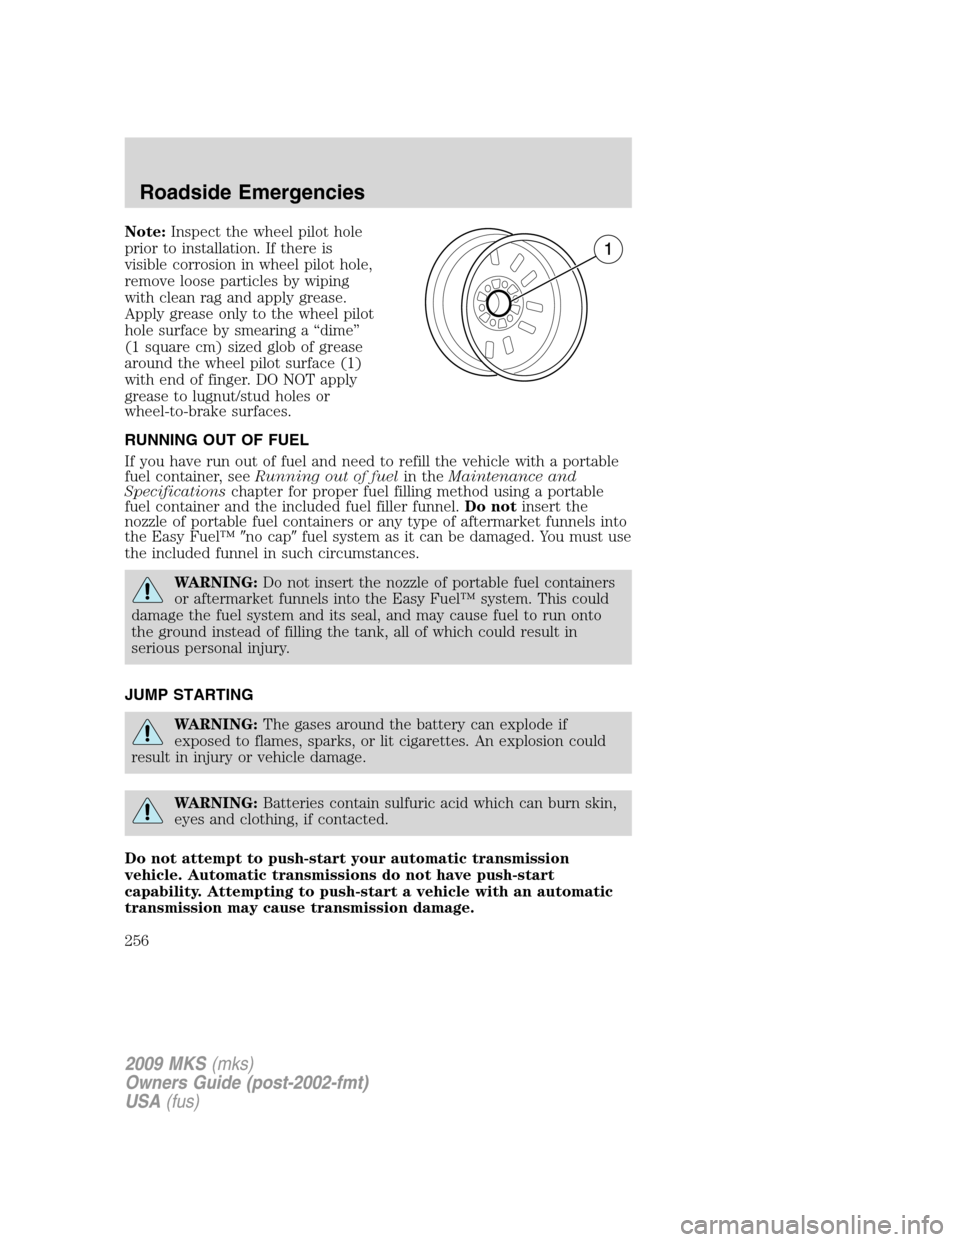 LINCOLN MKS 2009  Owners Manual Note:Inspect the wheel pilot hole
prior to installation. If there is
visible corrosion in wheel pilot hole,
remove loose particles by wiping
with clean rag and apply grease.
Apply grease only to the w